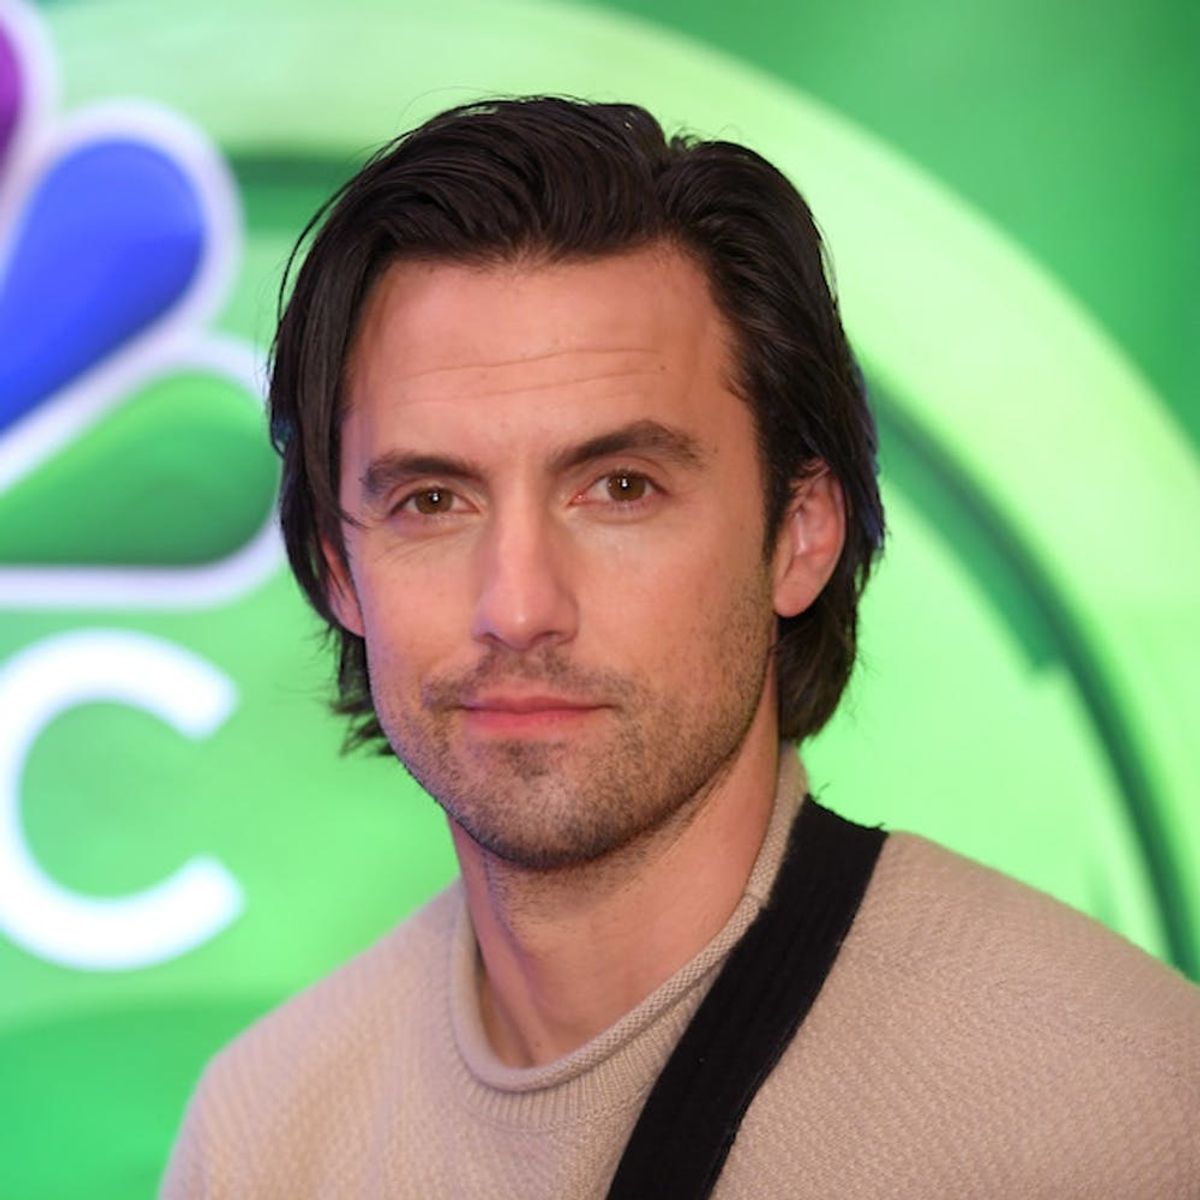 Milo Ventimiglia’s Reaction to Being a Sex Symbol Is Strangely Sweet